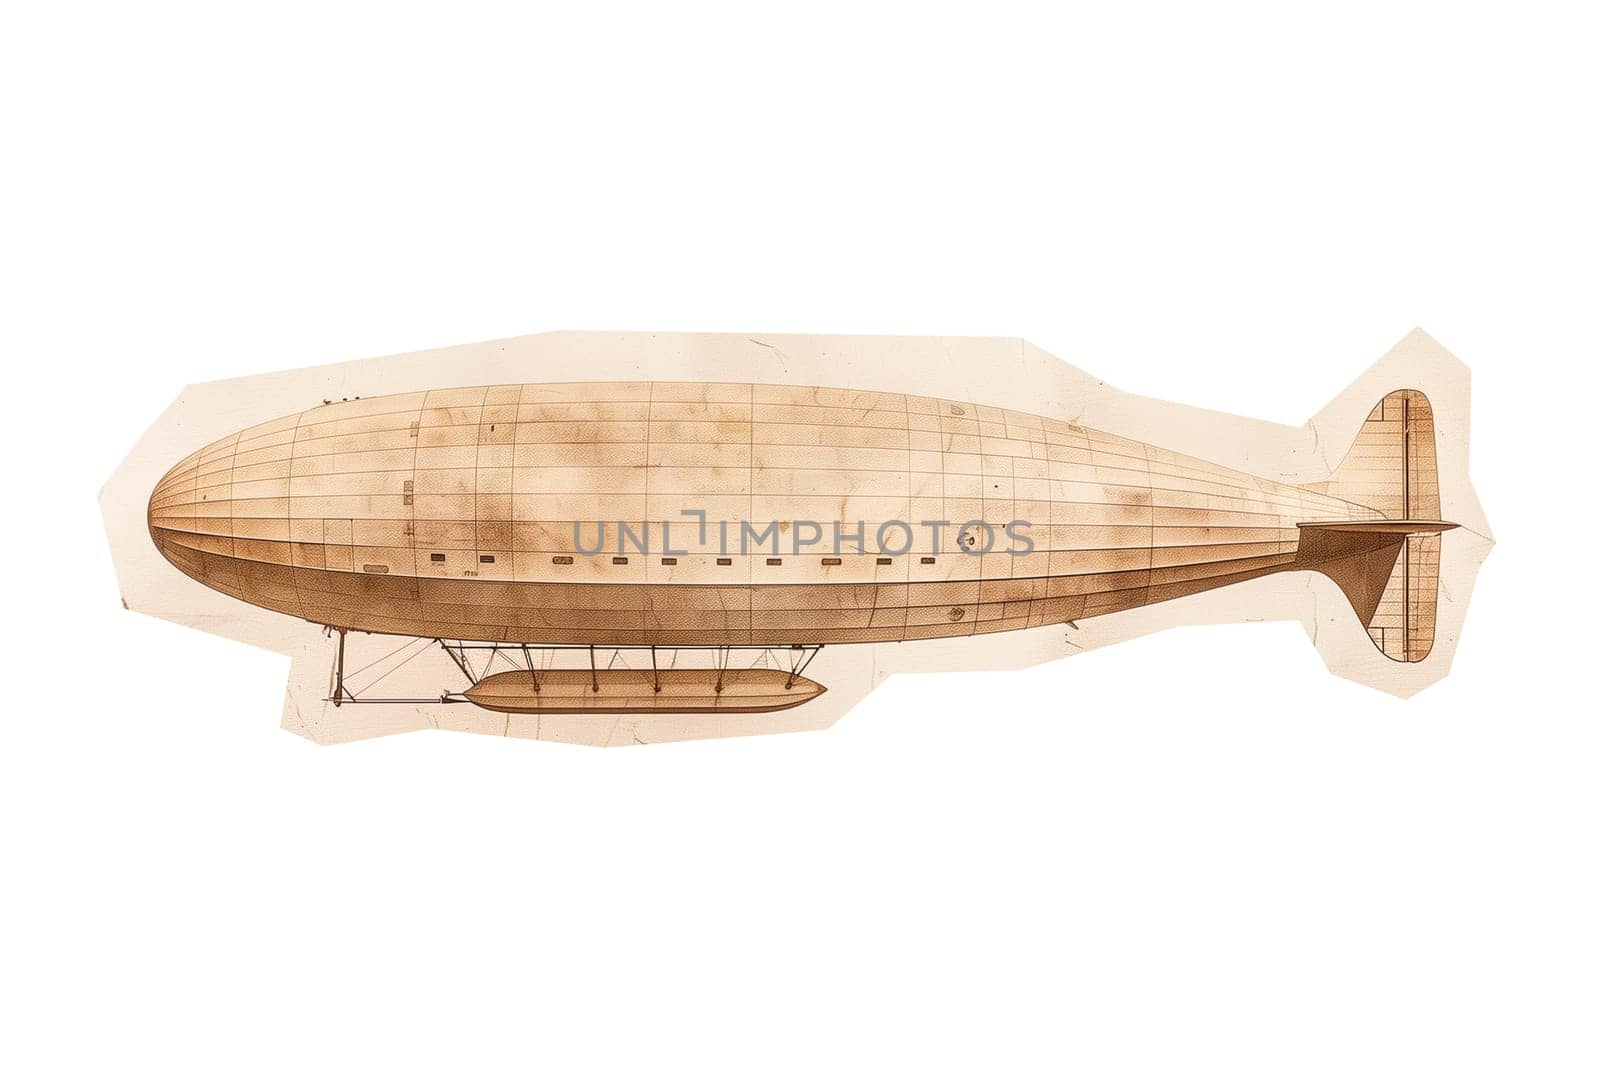 Dirigible airship sepia effect cut out photo by Dustick